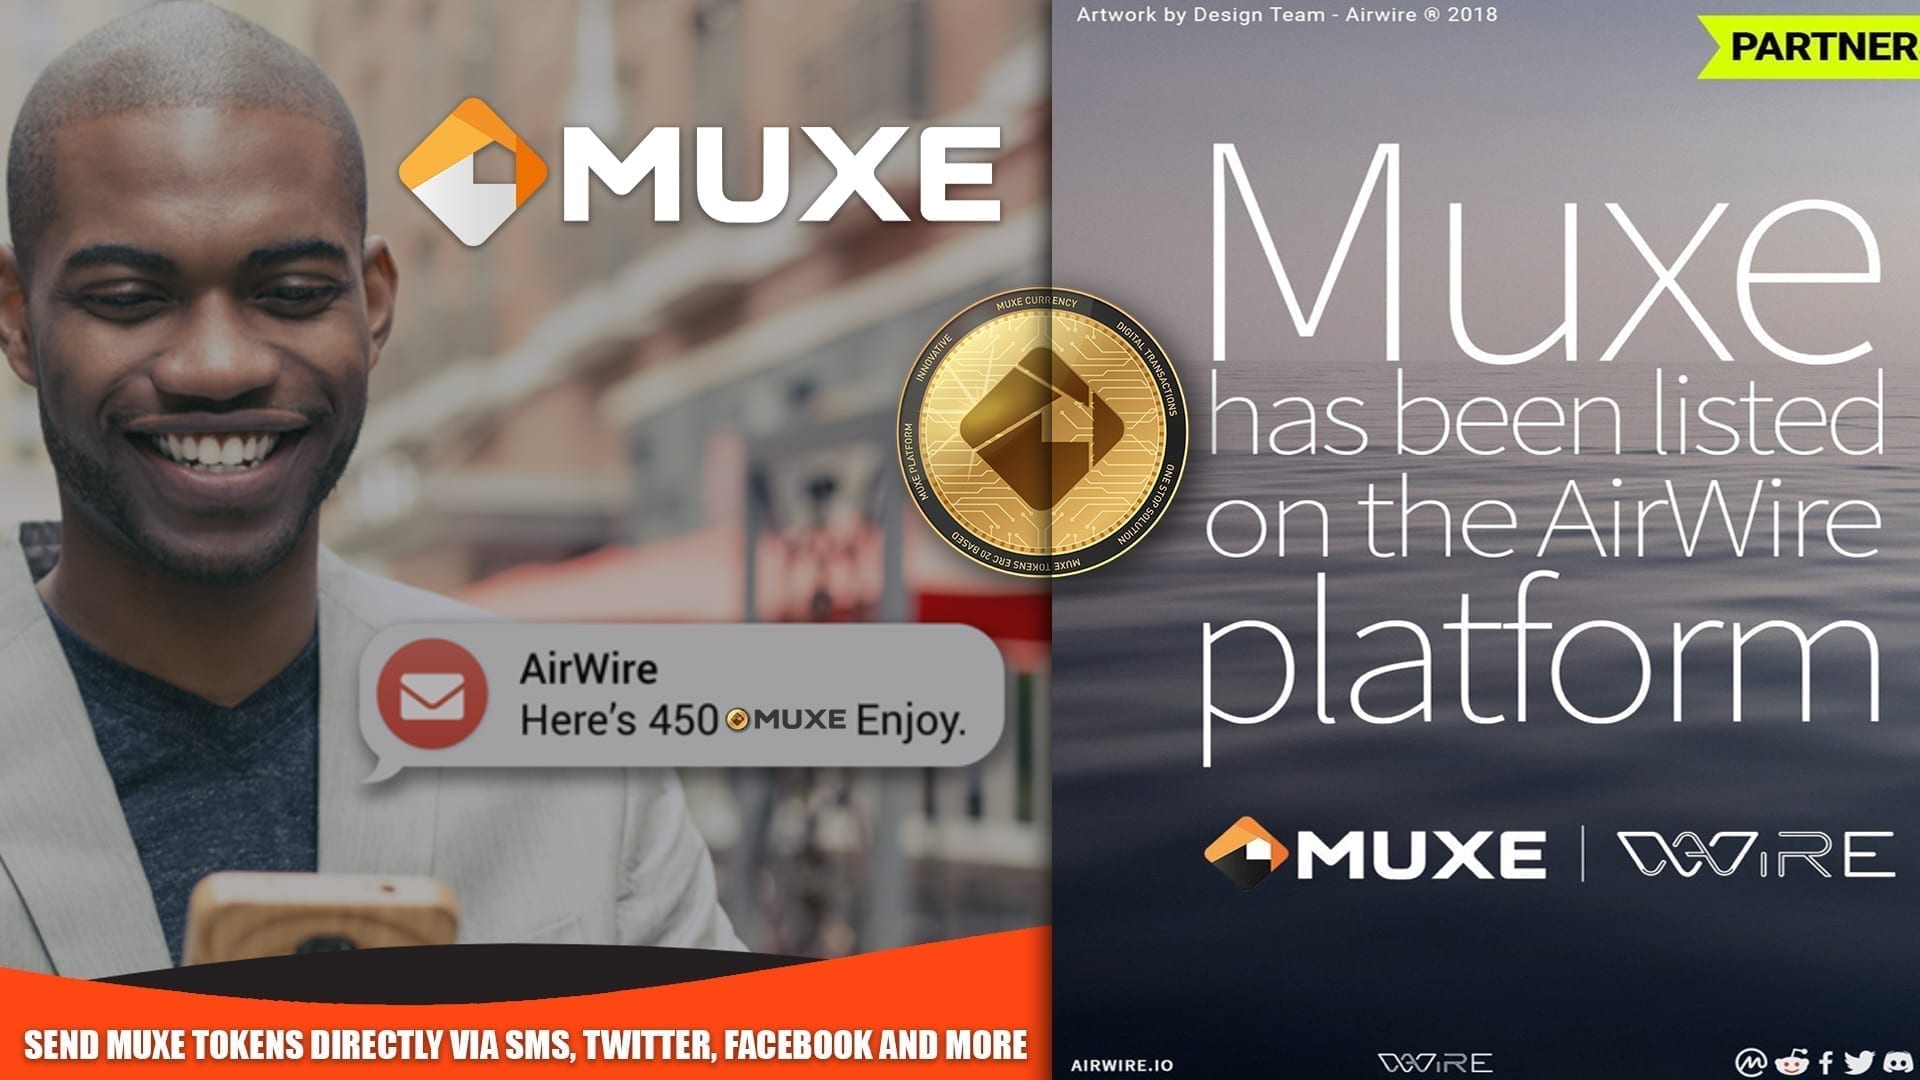 MUXE is proud to announce our partnership with AirWire